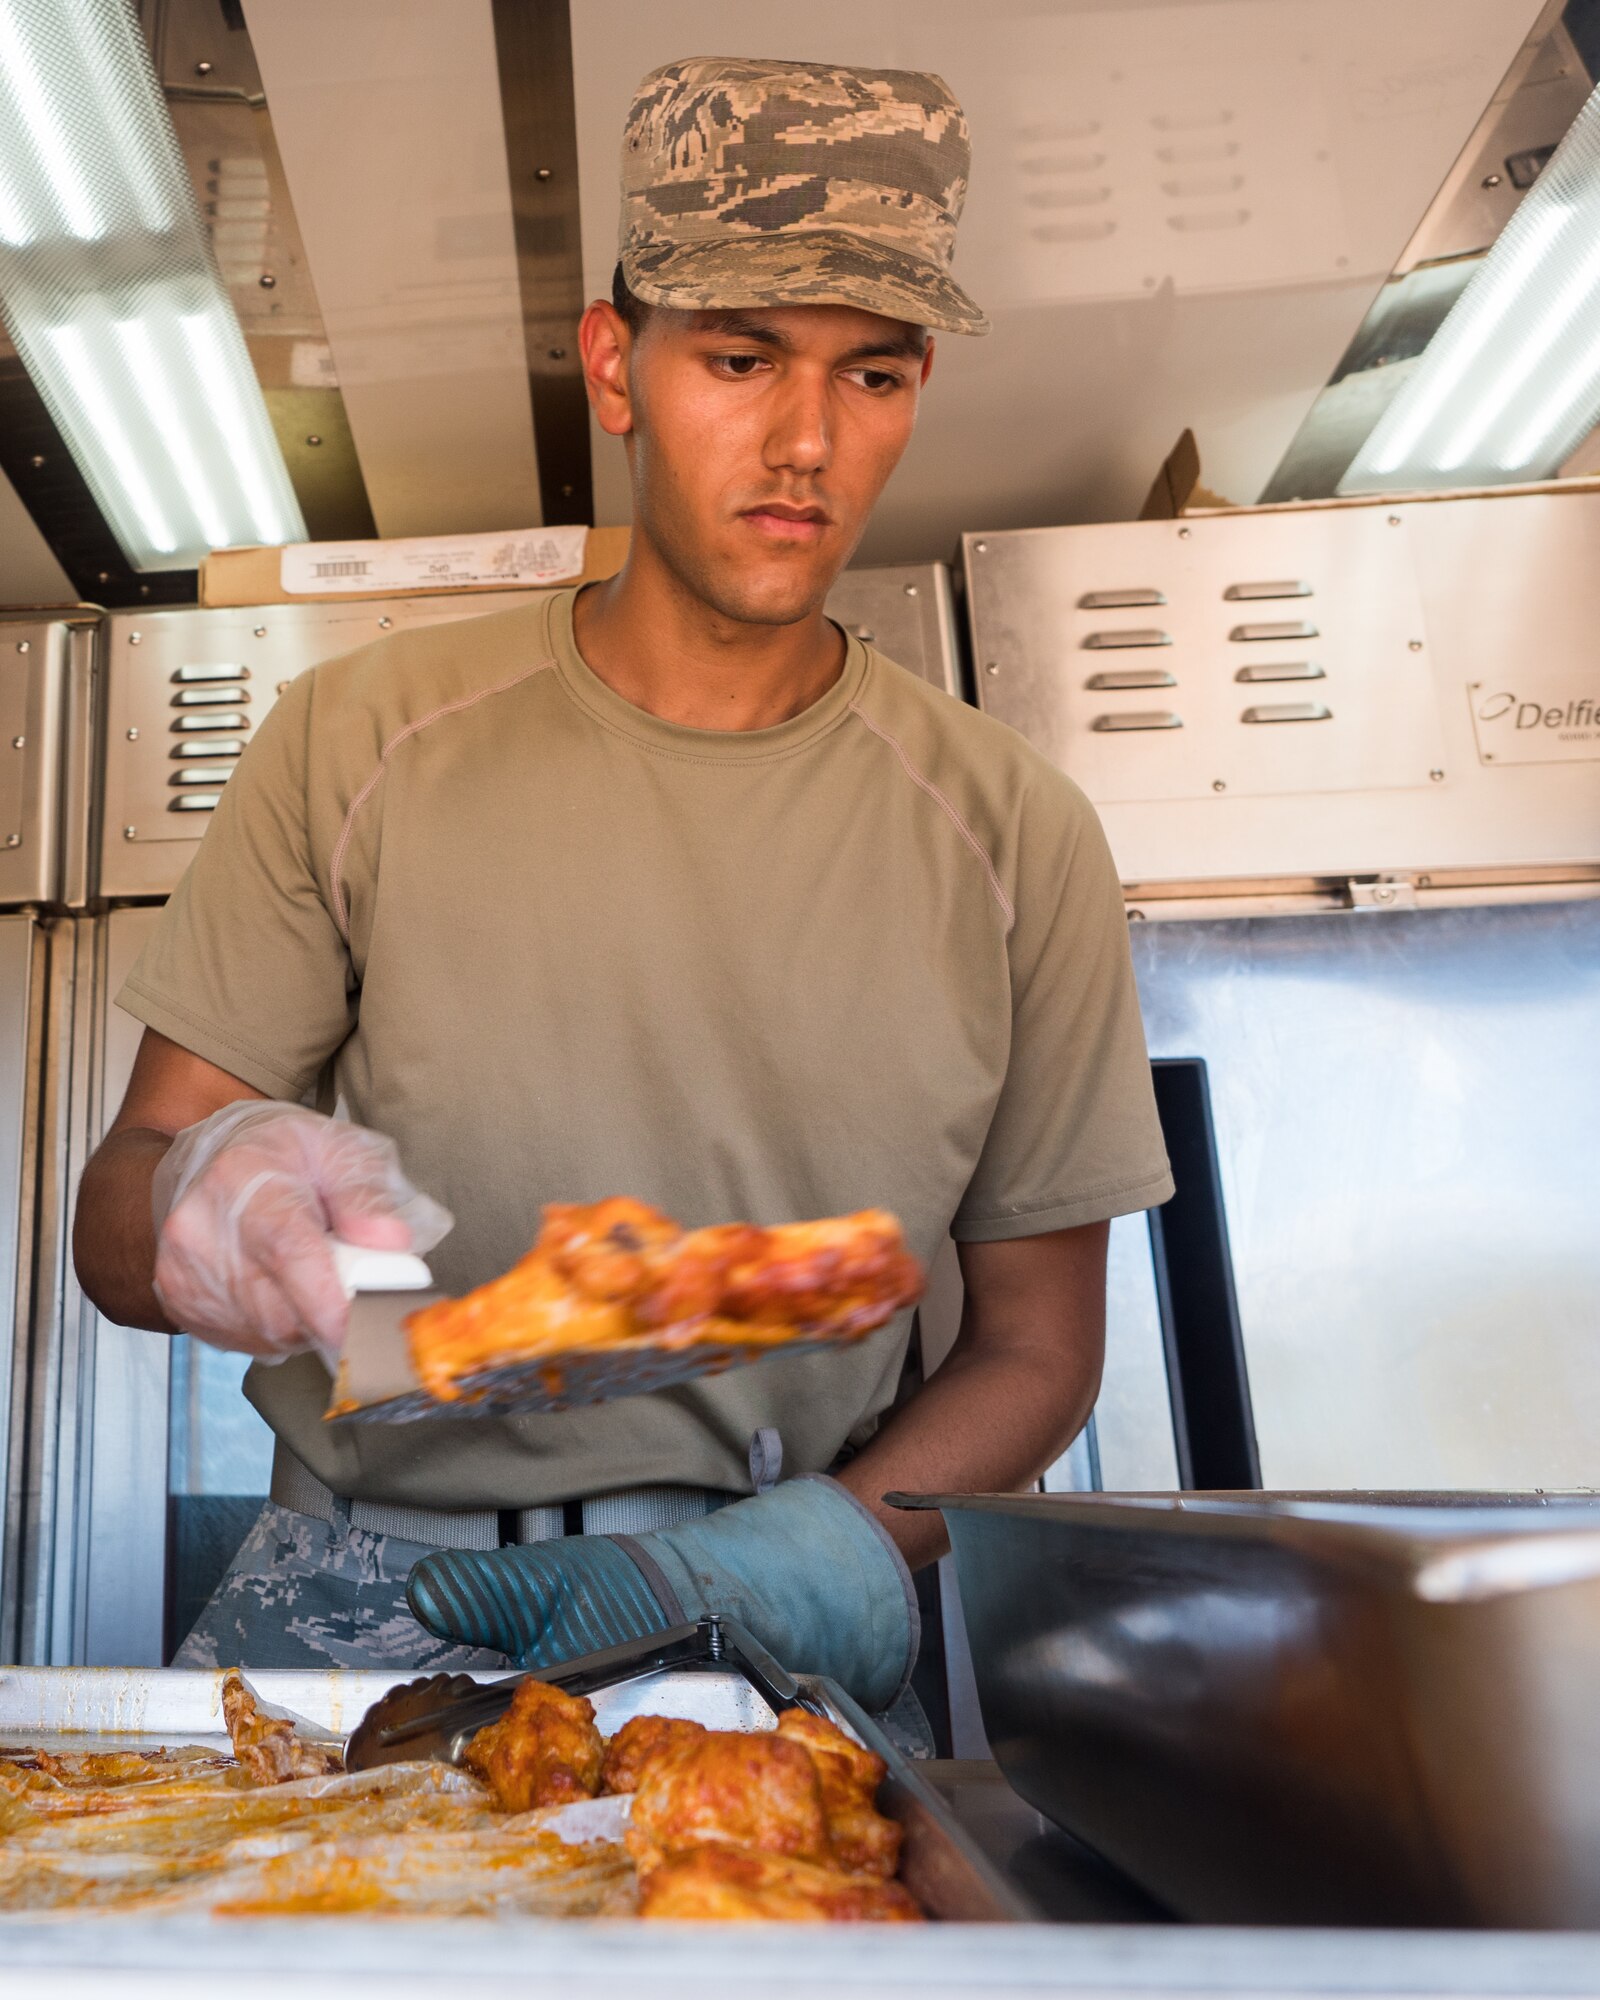 U.S. Air Force Senior Airman Ernesto Lopez Falcon, a services specialist with the 116th Air Control Wing (ACW), Georgia Air National Guard, prepares chicken wings for lunch from a Disaster Relief Mobile Kitchen Trailer during Innovative Readiness Training at Camp Paumalu Girl Scout Camp, Hawaii, July 24, 2019.